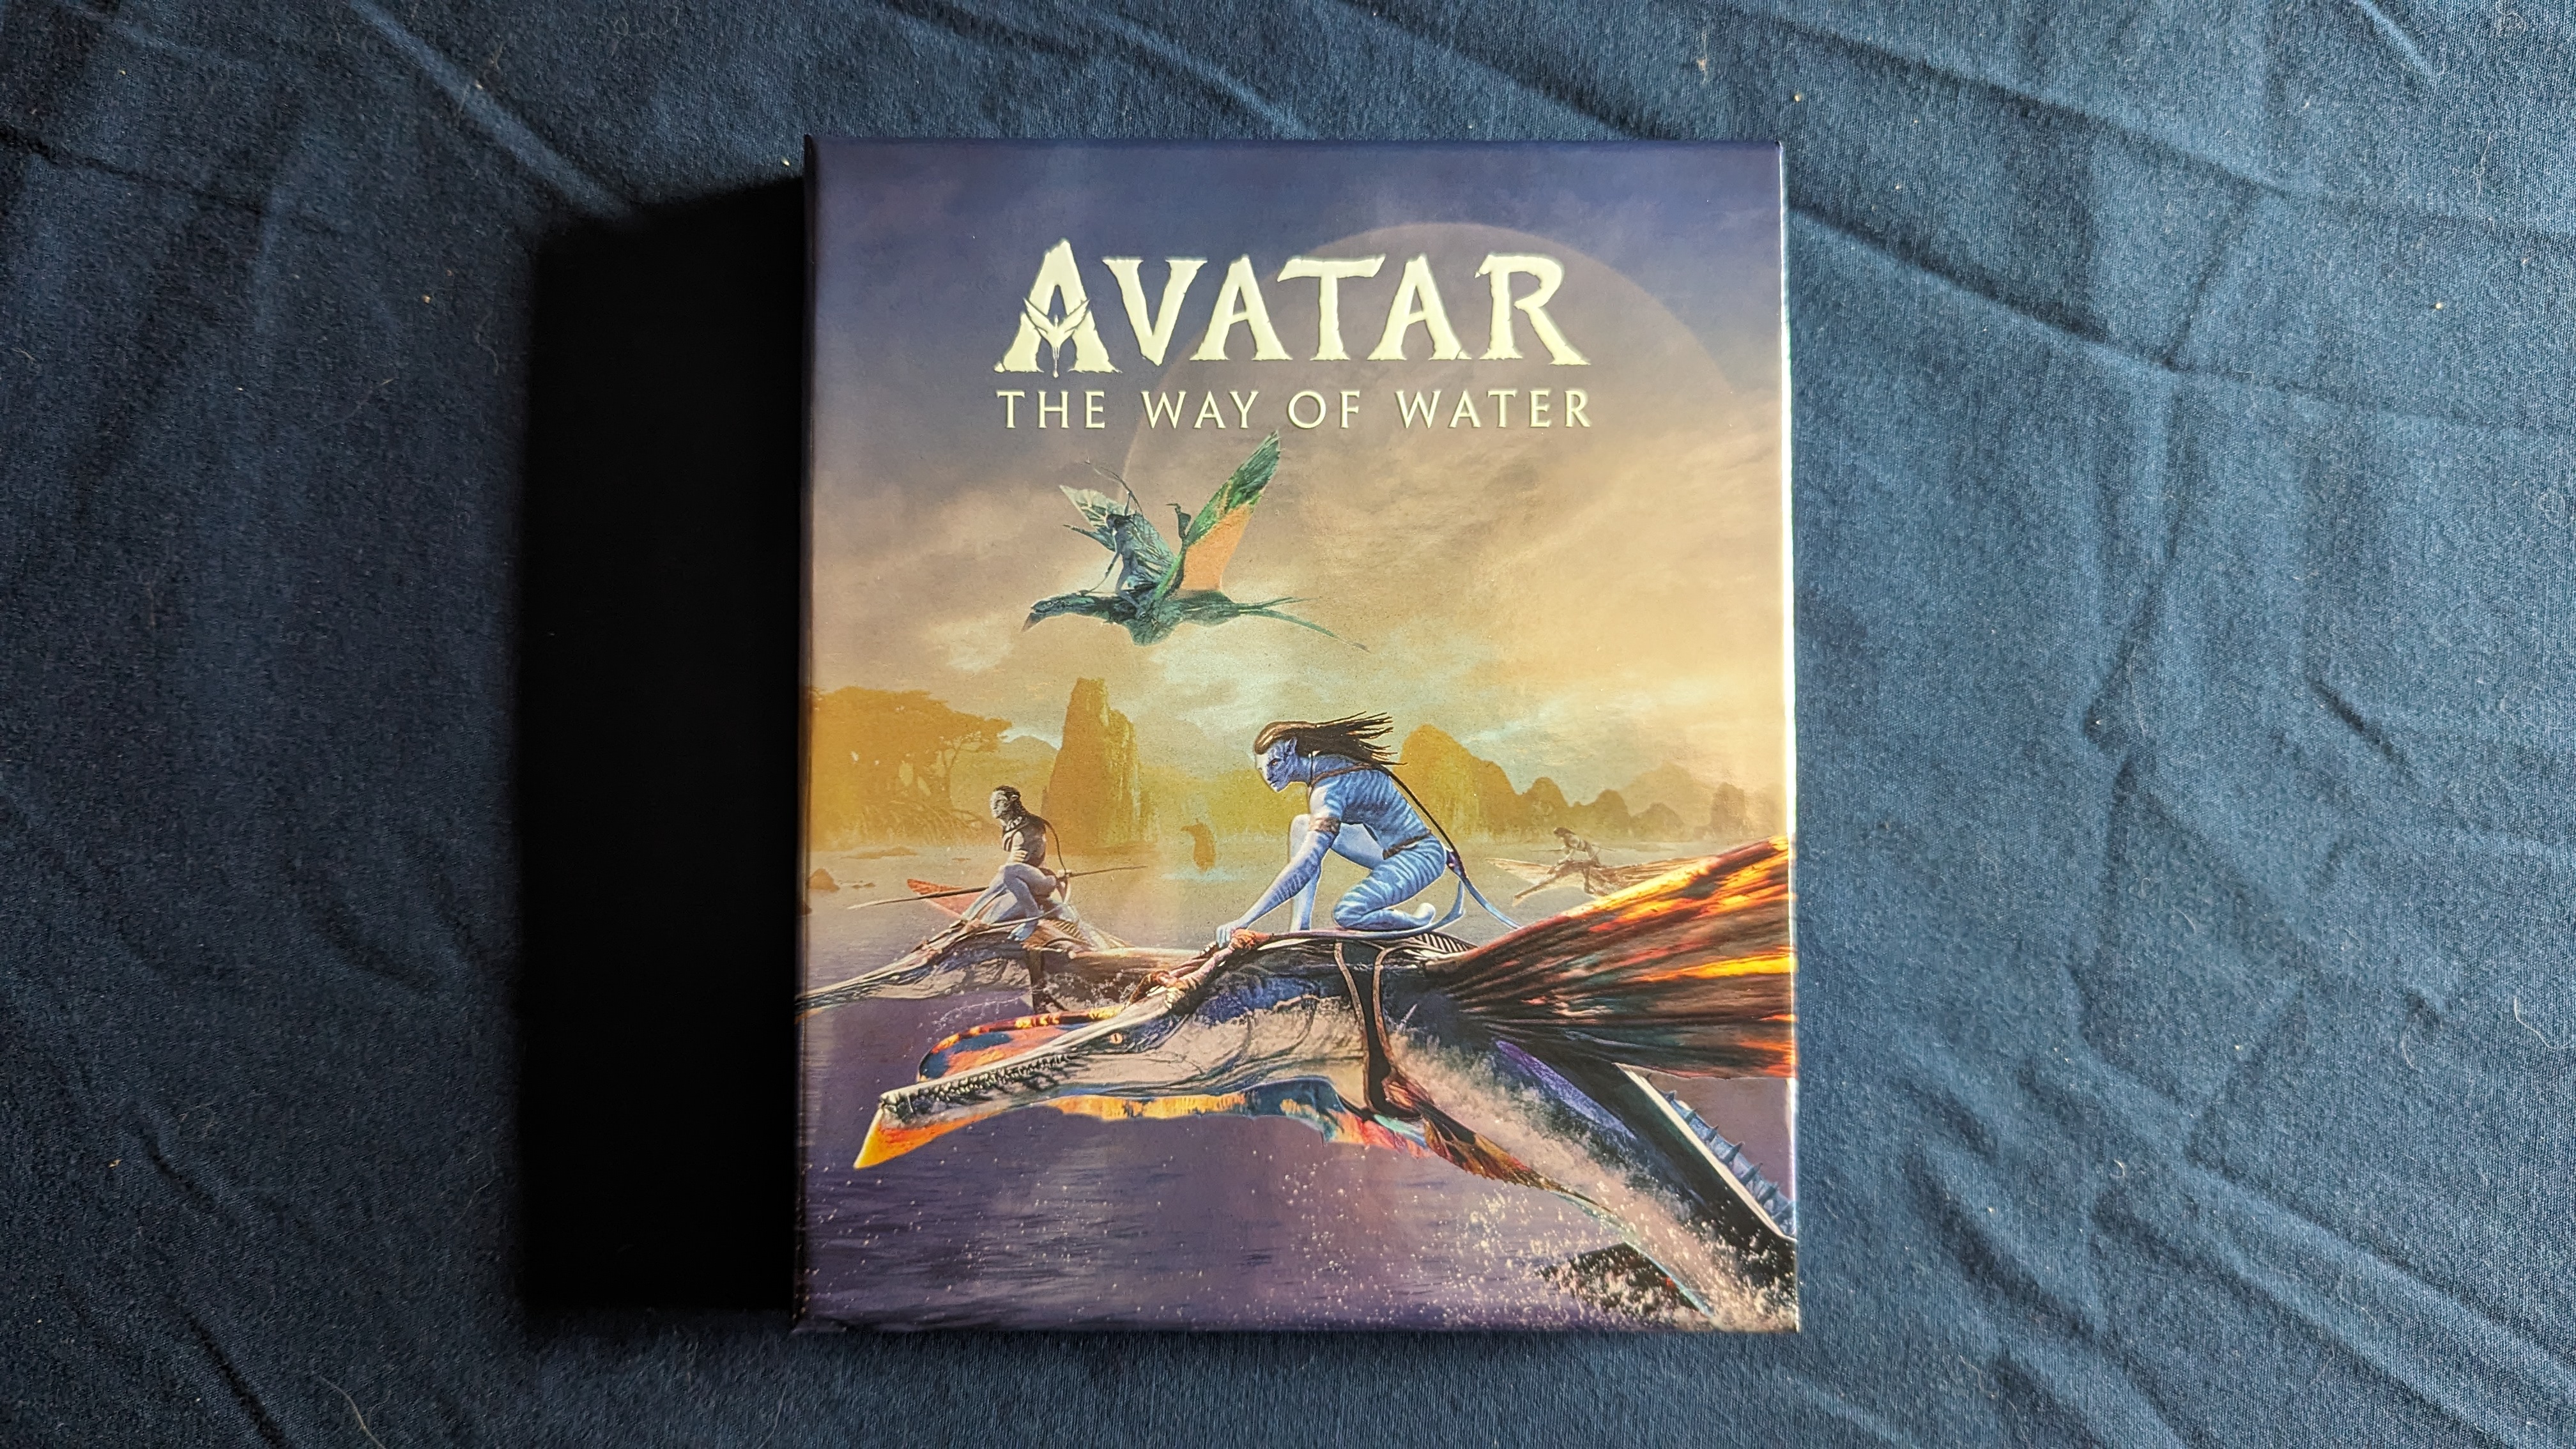 Avatar: The Way of Water Collector's Edition - 4K Ultra HD Blu-ray